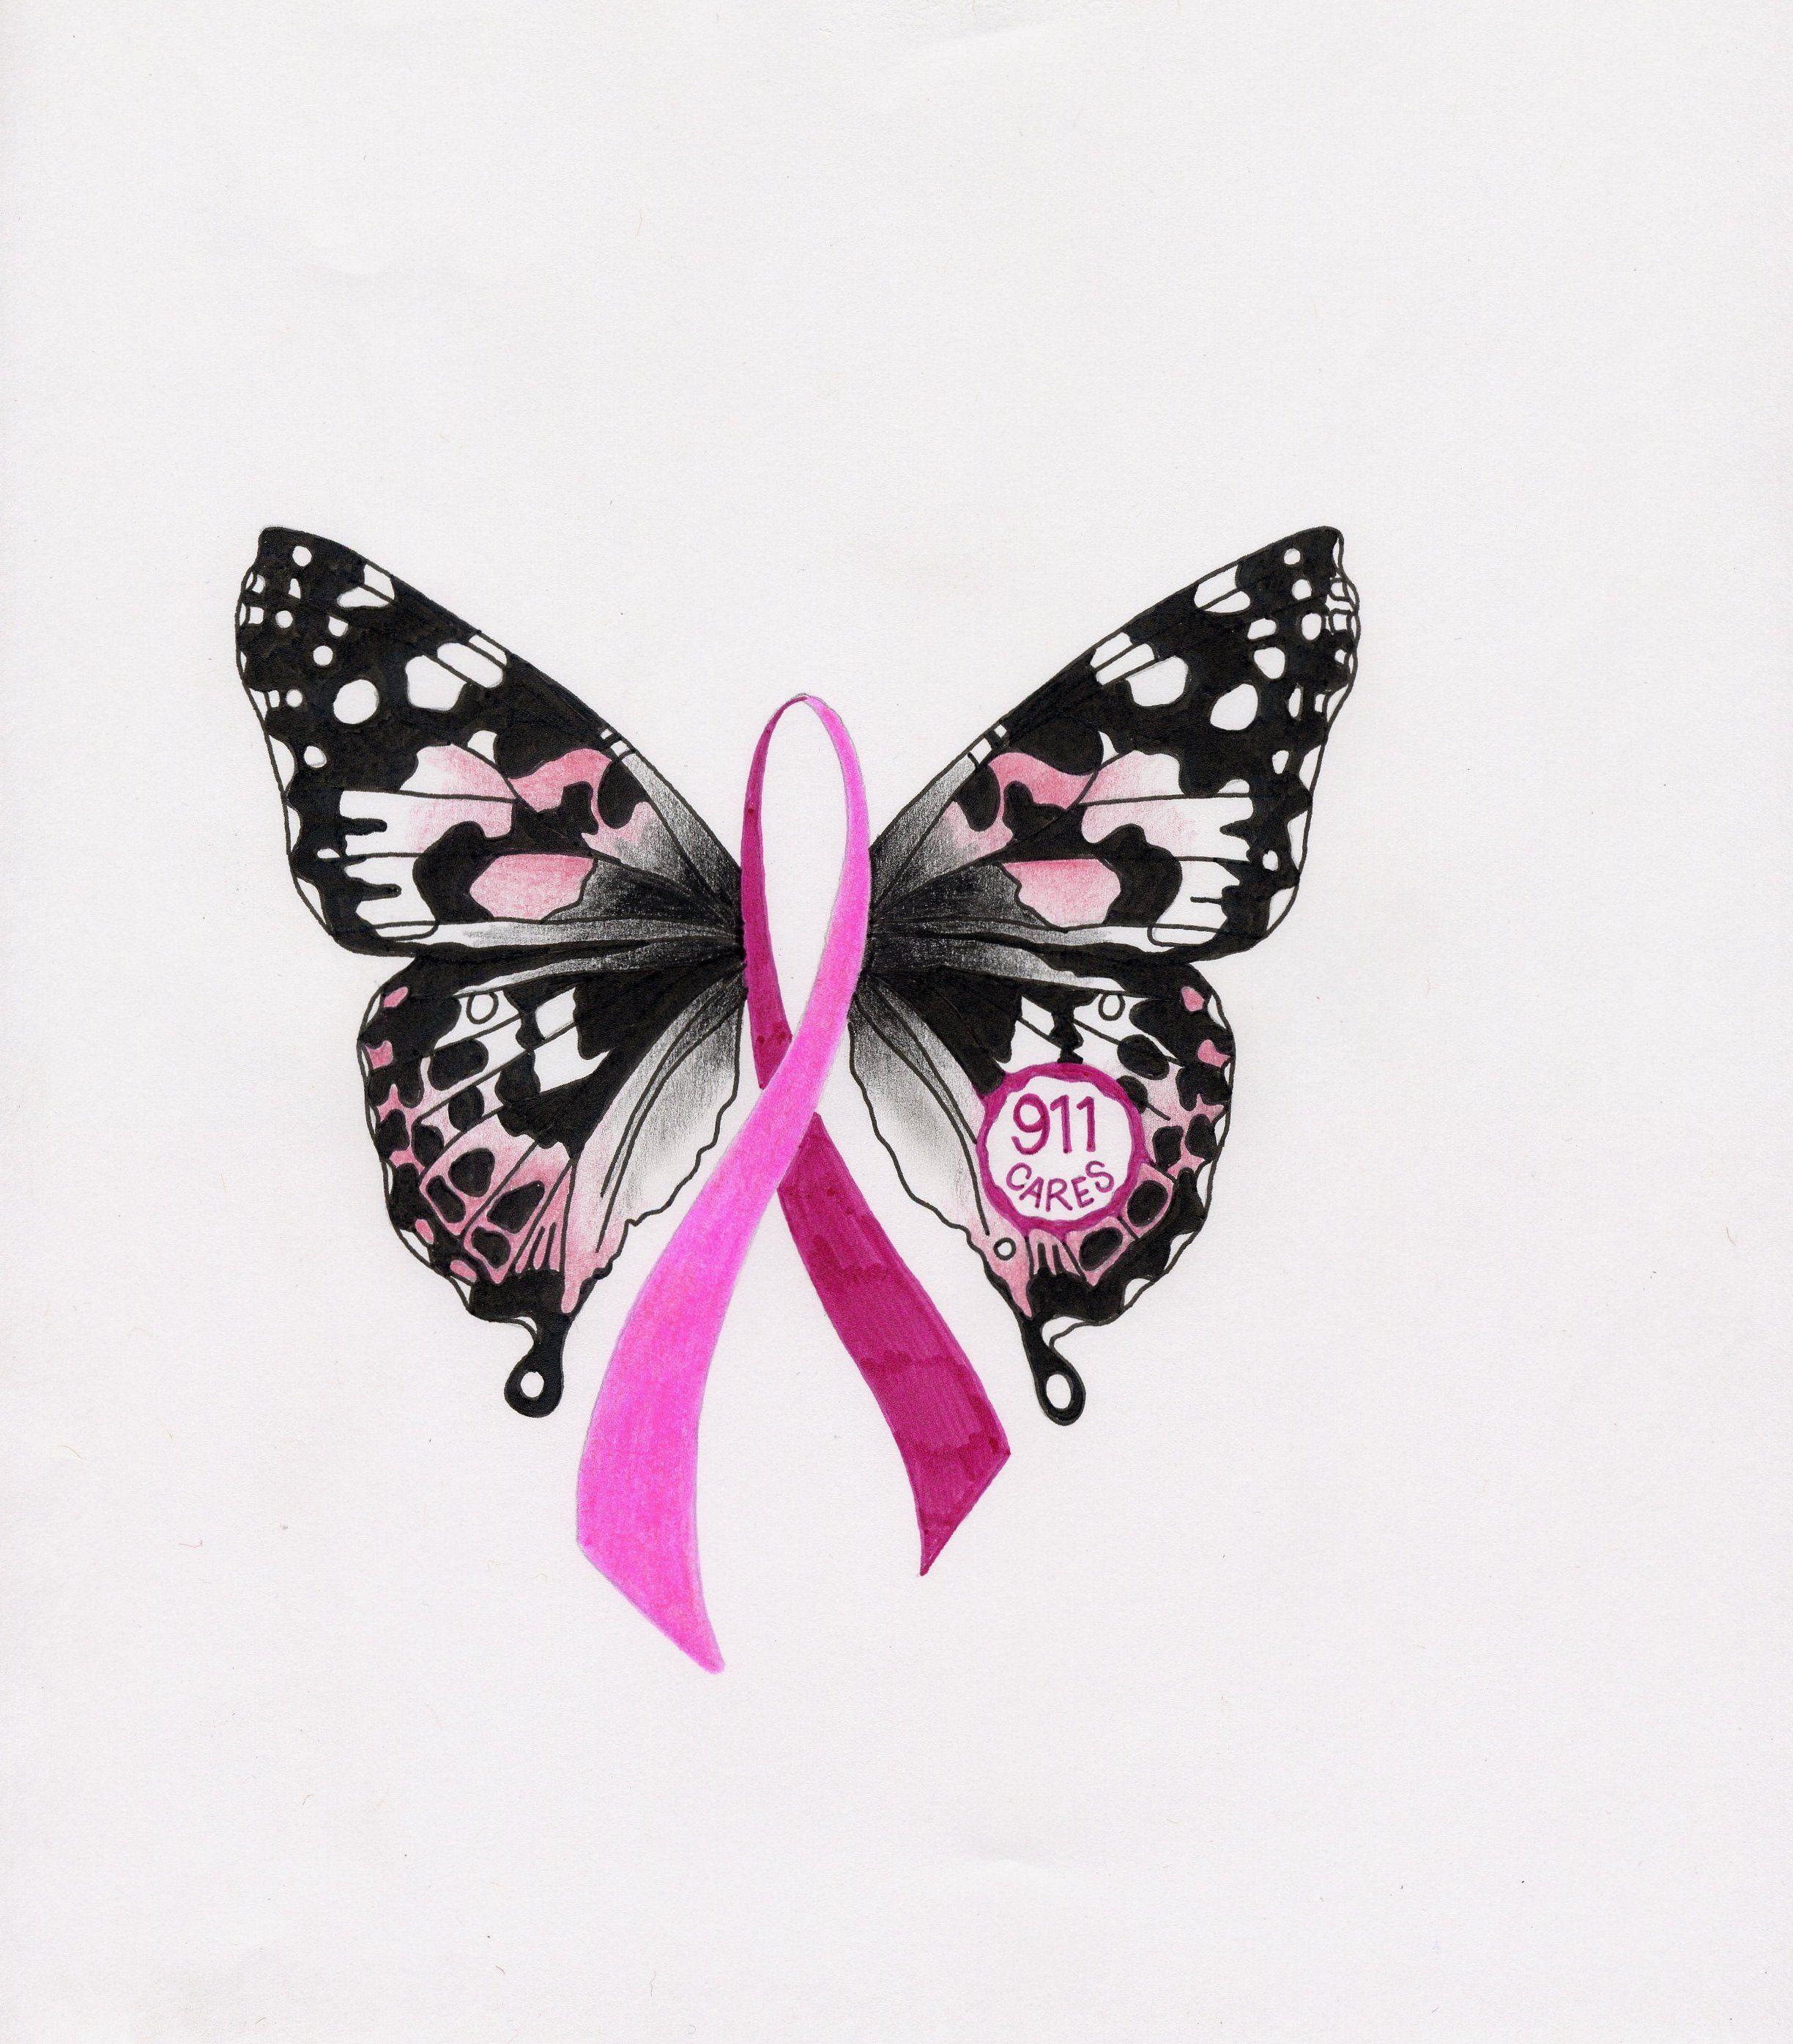 The Breast Cancer Research Wallpaper